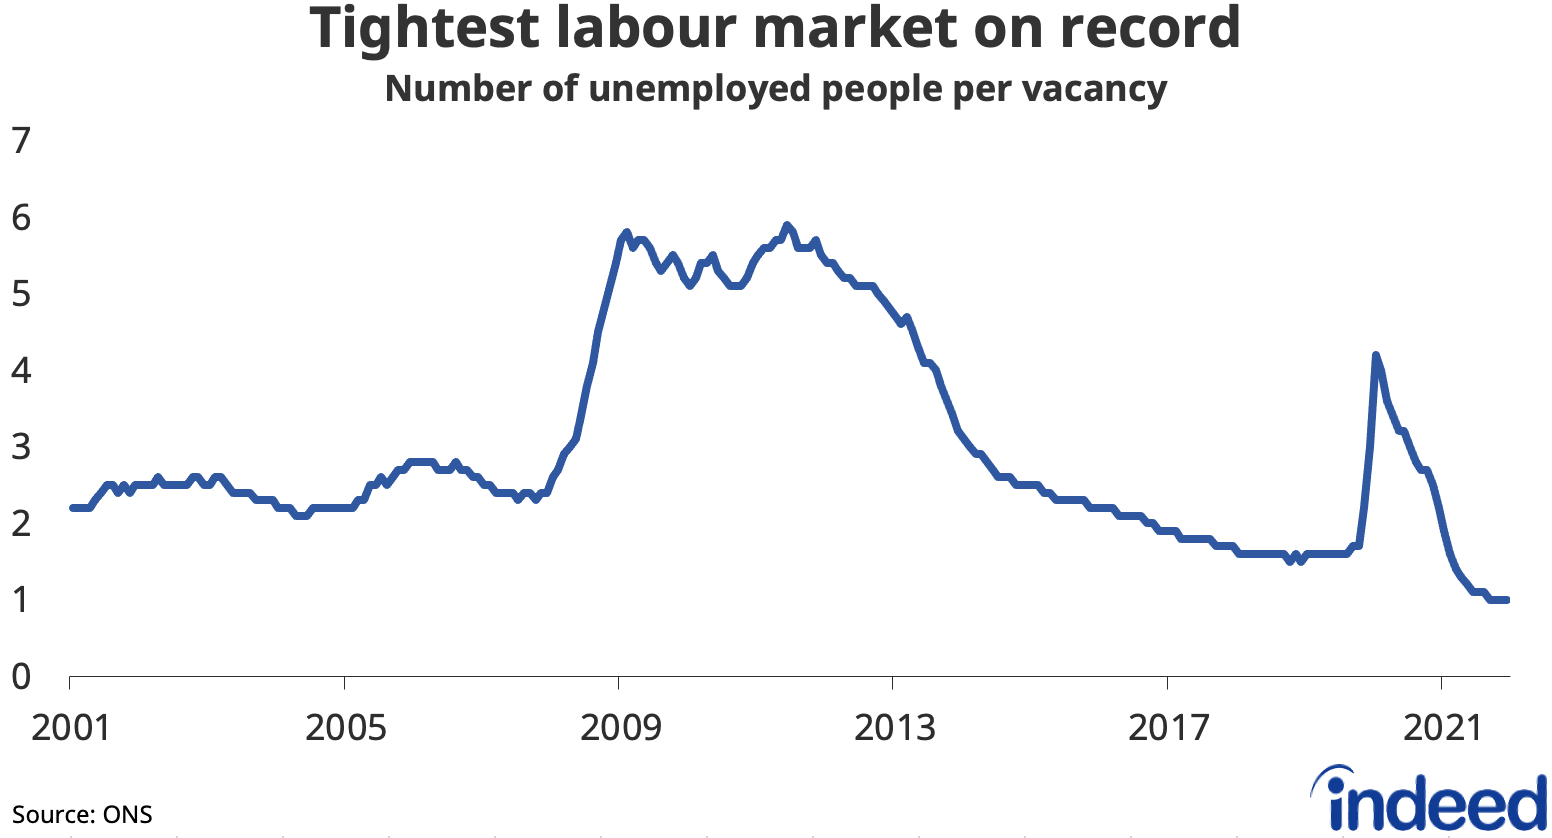 Line chart showing that this is the tightest labour market on record.